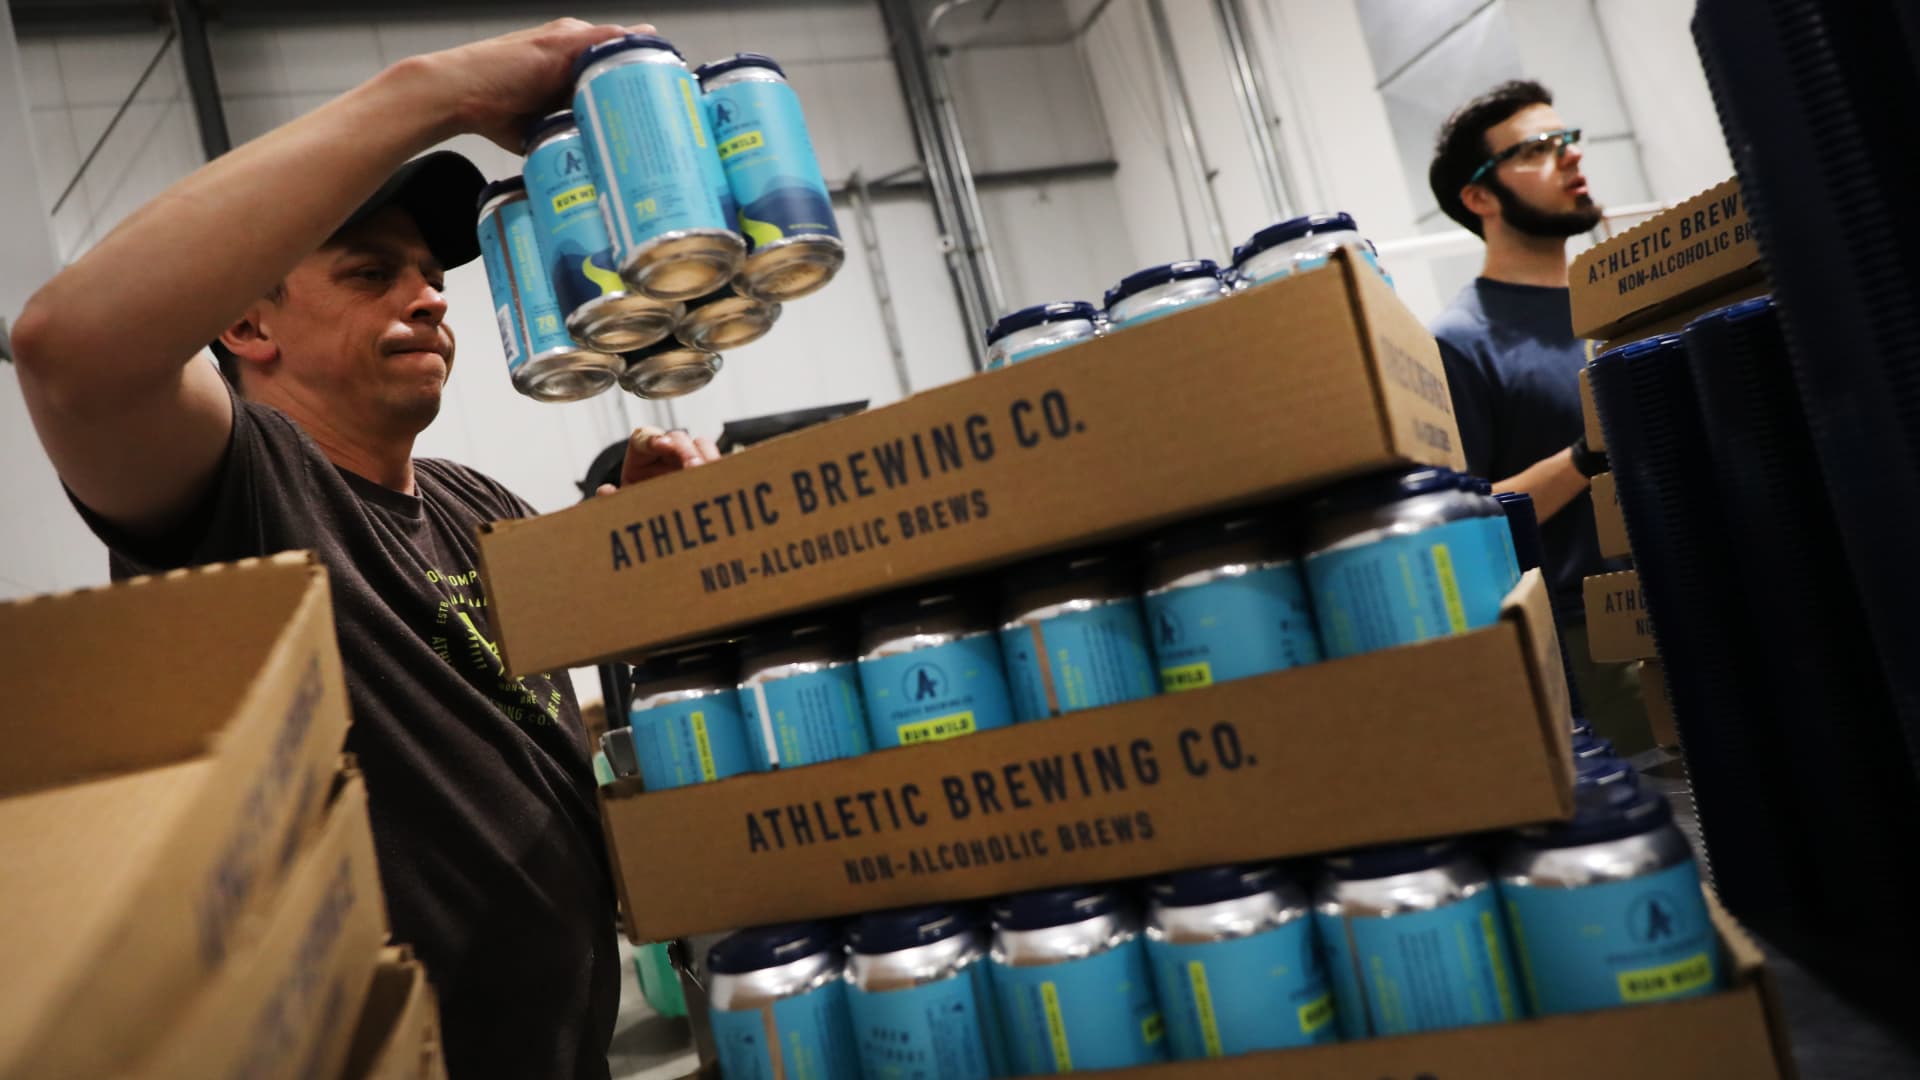 Non-alcoholic beer to continue growing in 2023, Athletic Brewing Company CEO says - CNBC